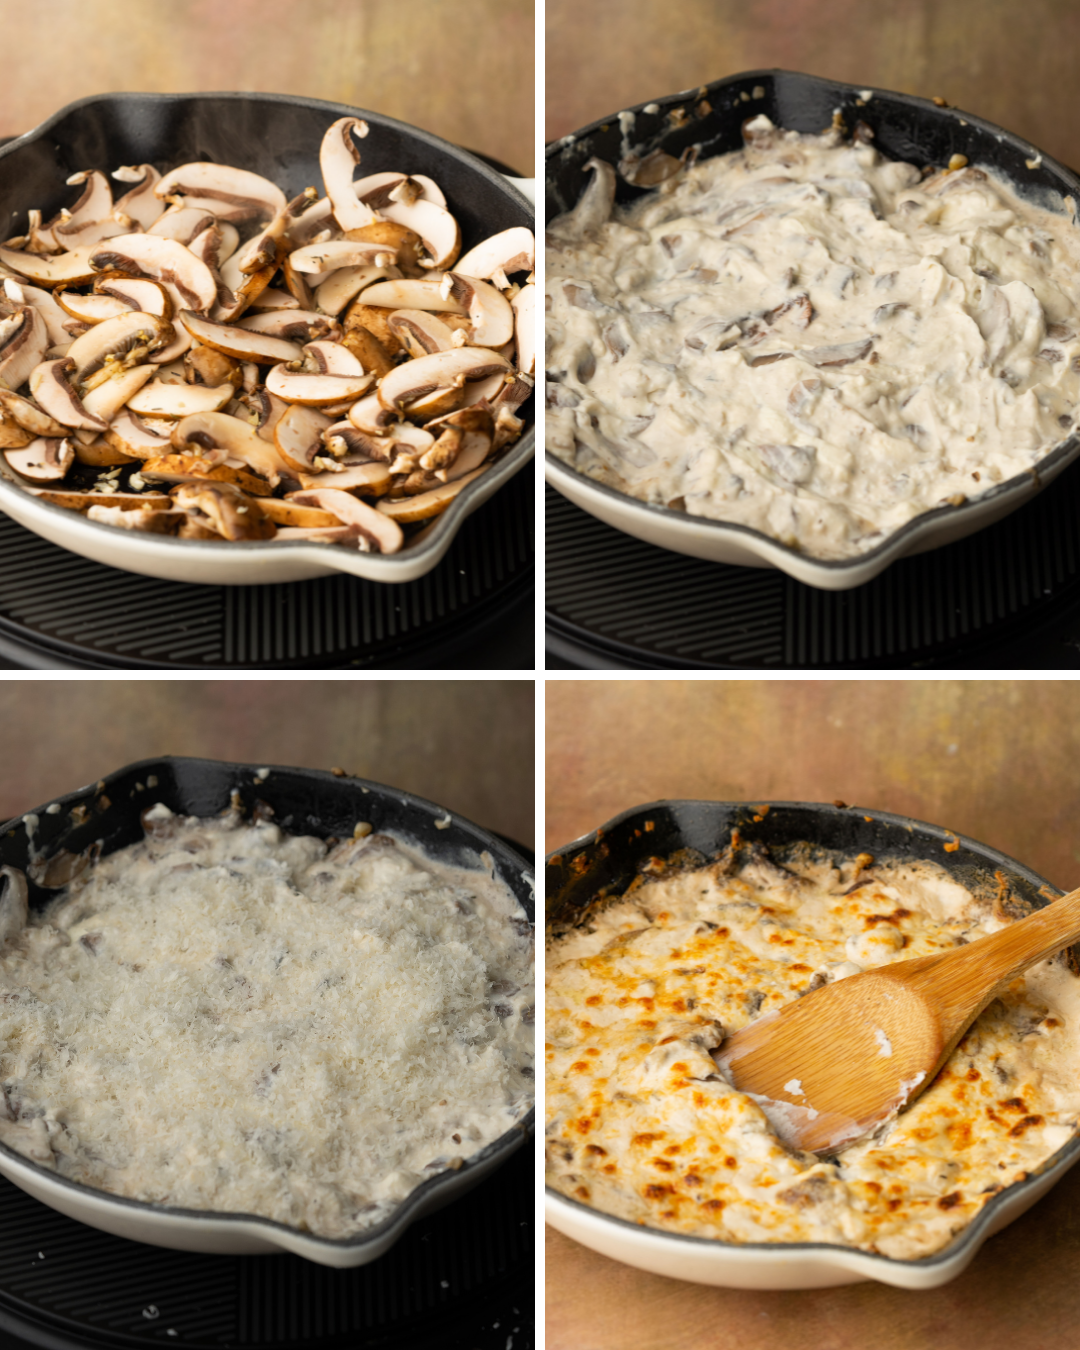 Step by step assembly of a cream cheese mushroom dip